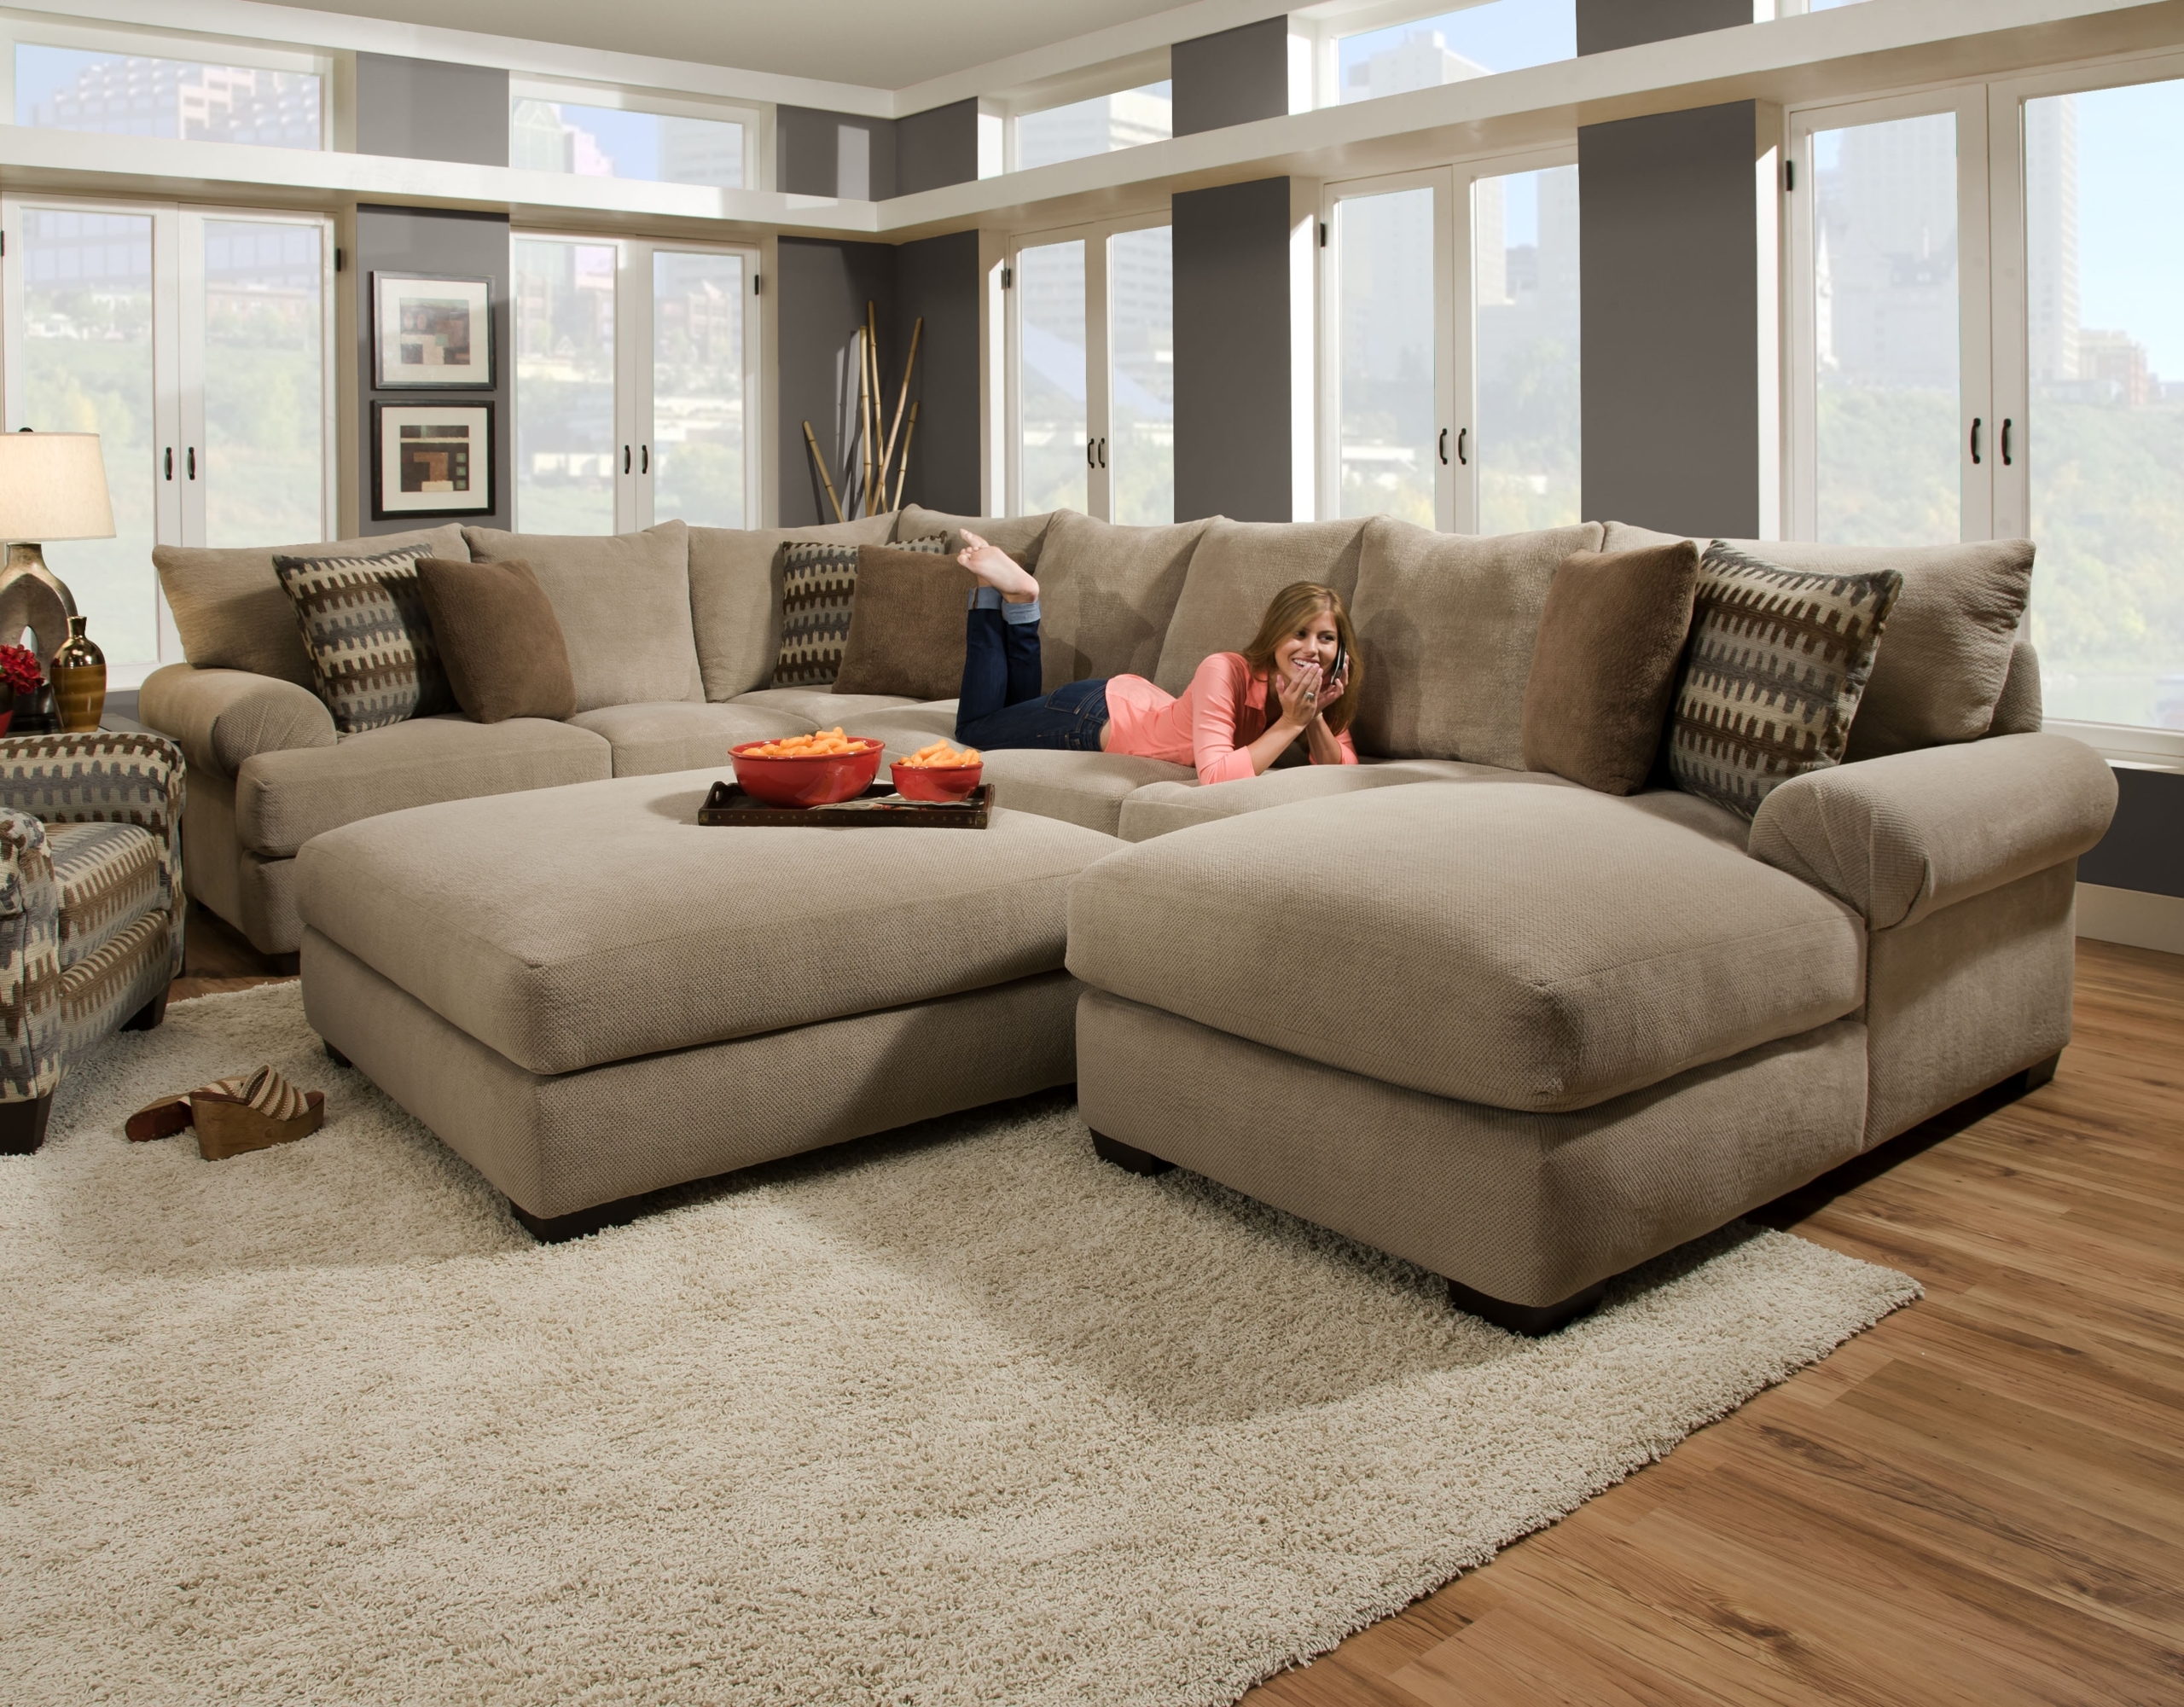 Extra Large Sectional Sofa Visualhunt, Big Sectionals Sofas